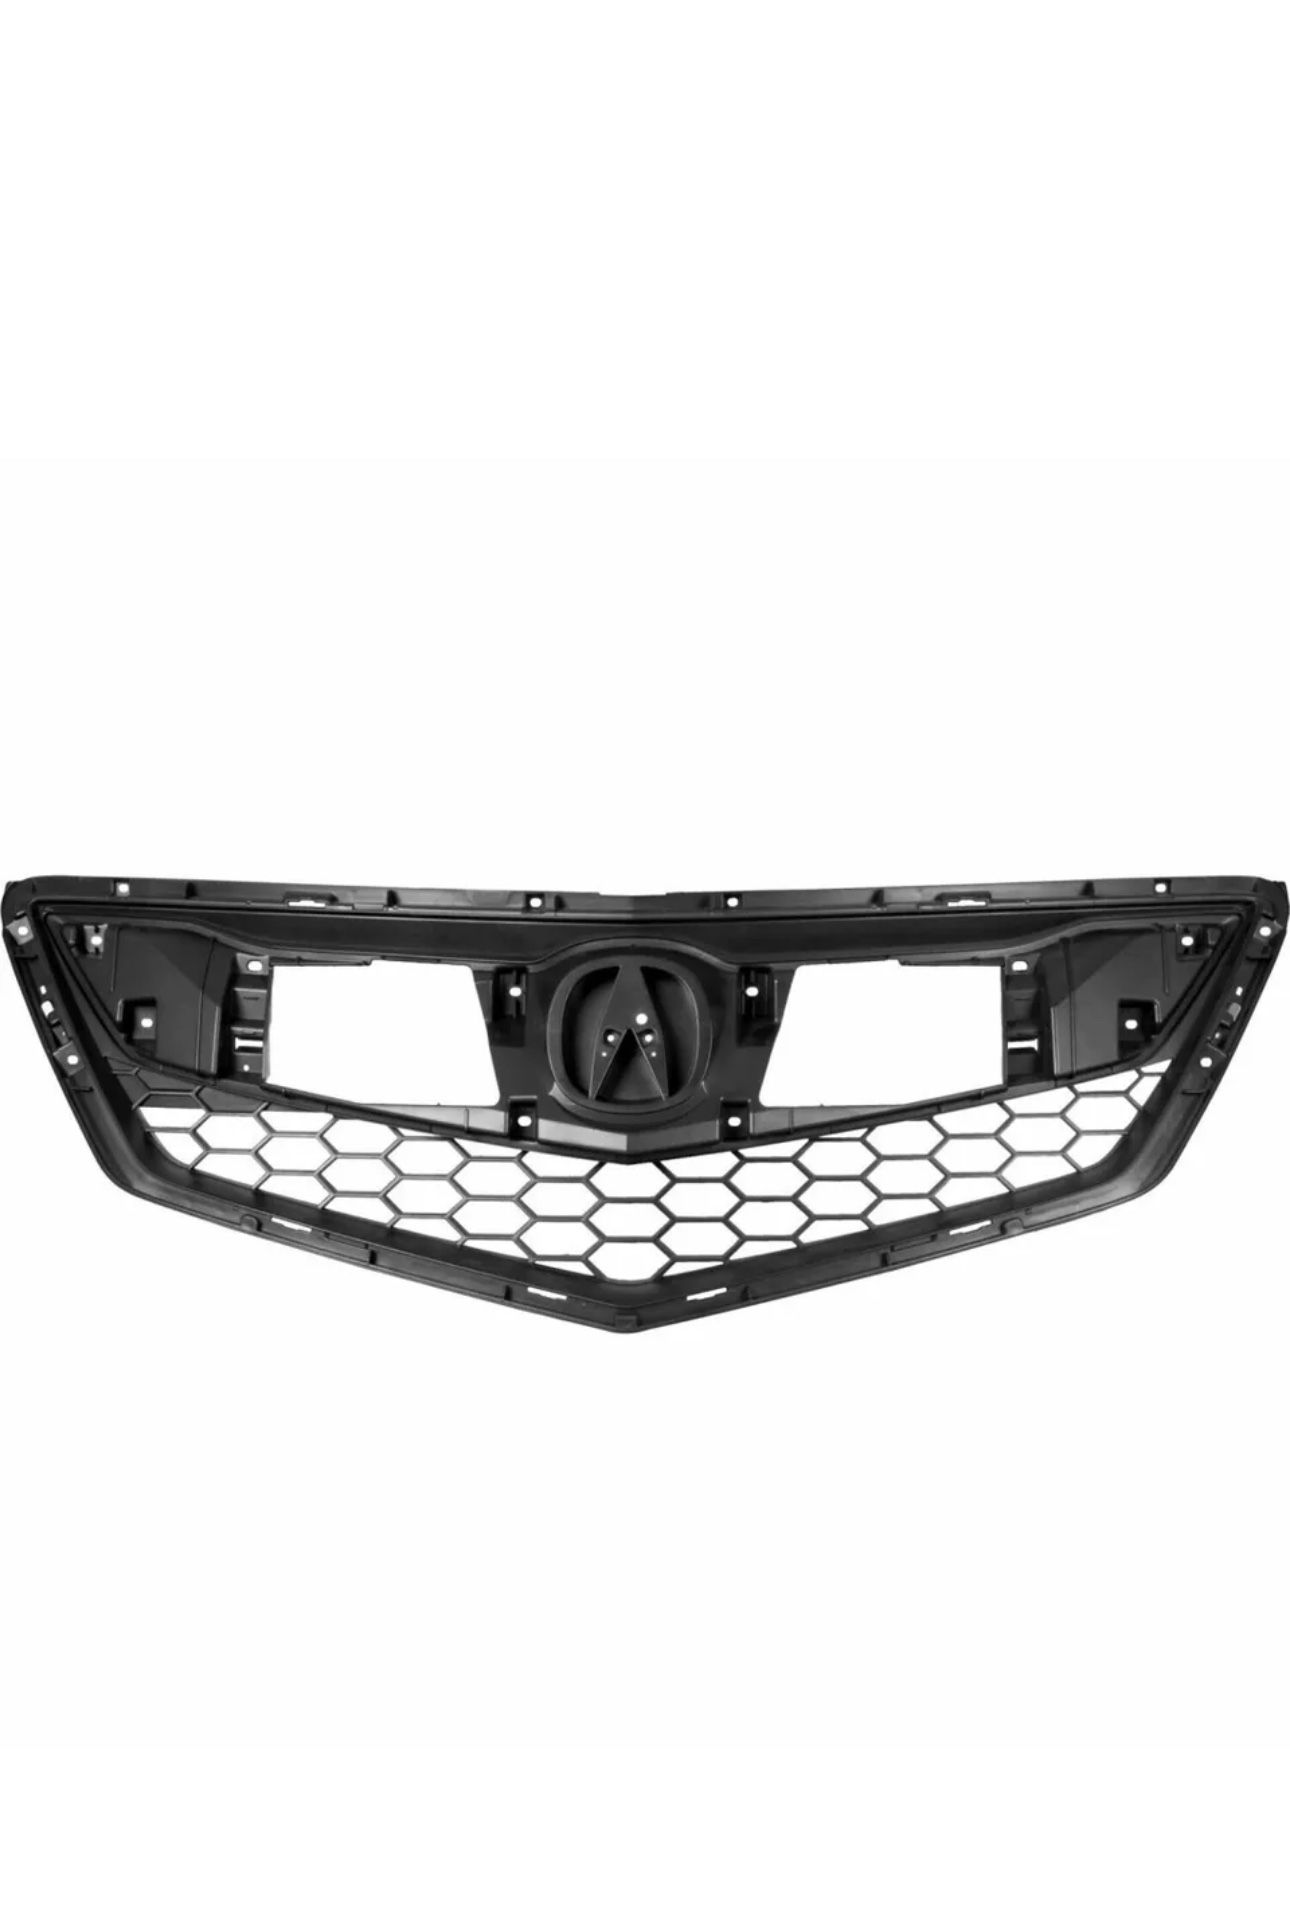 2016-18 Acura RDX Front Grille